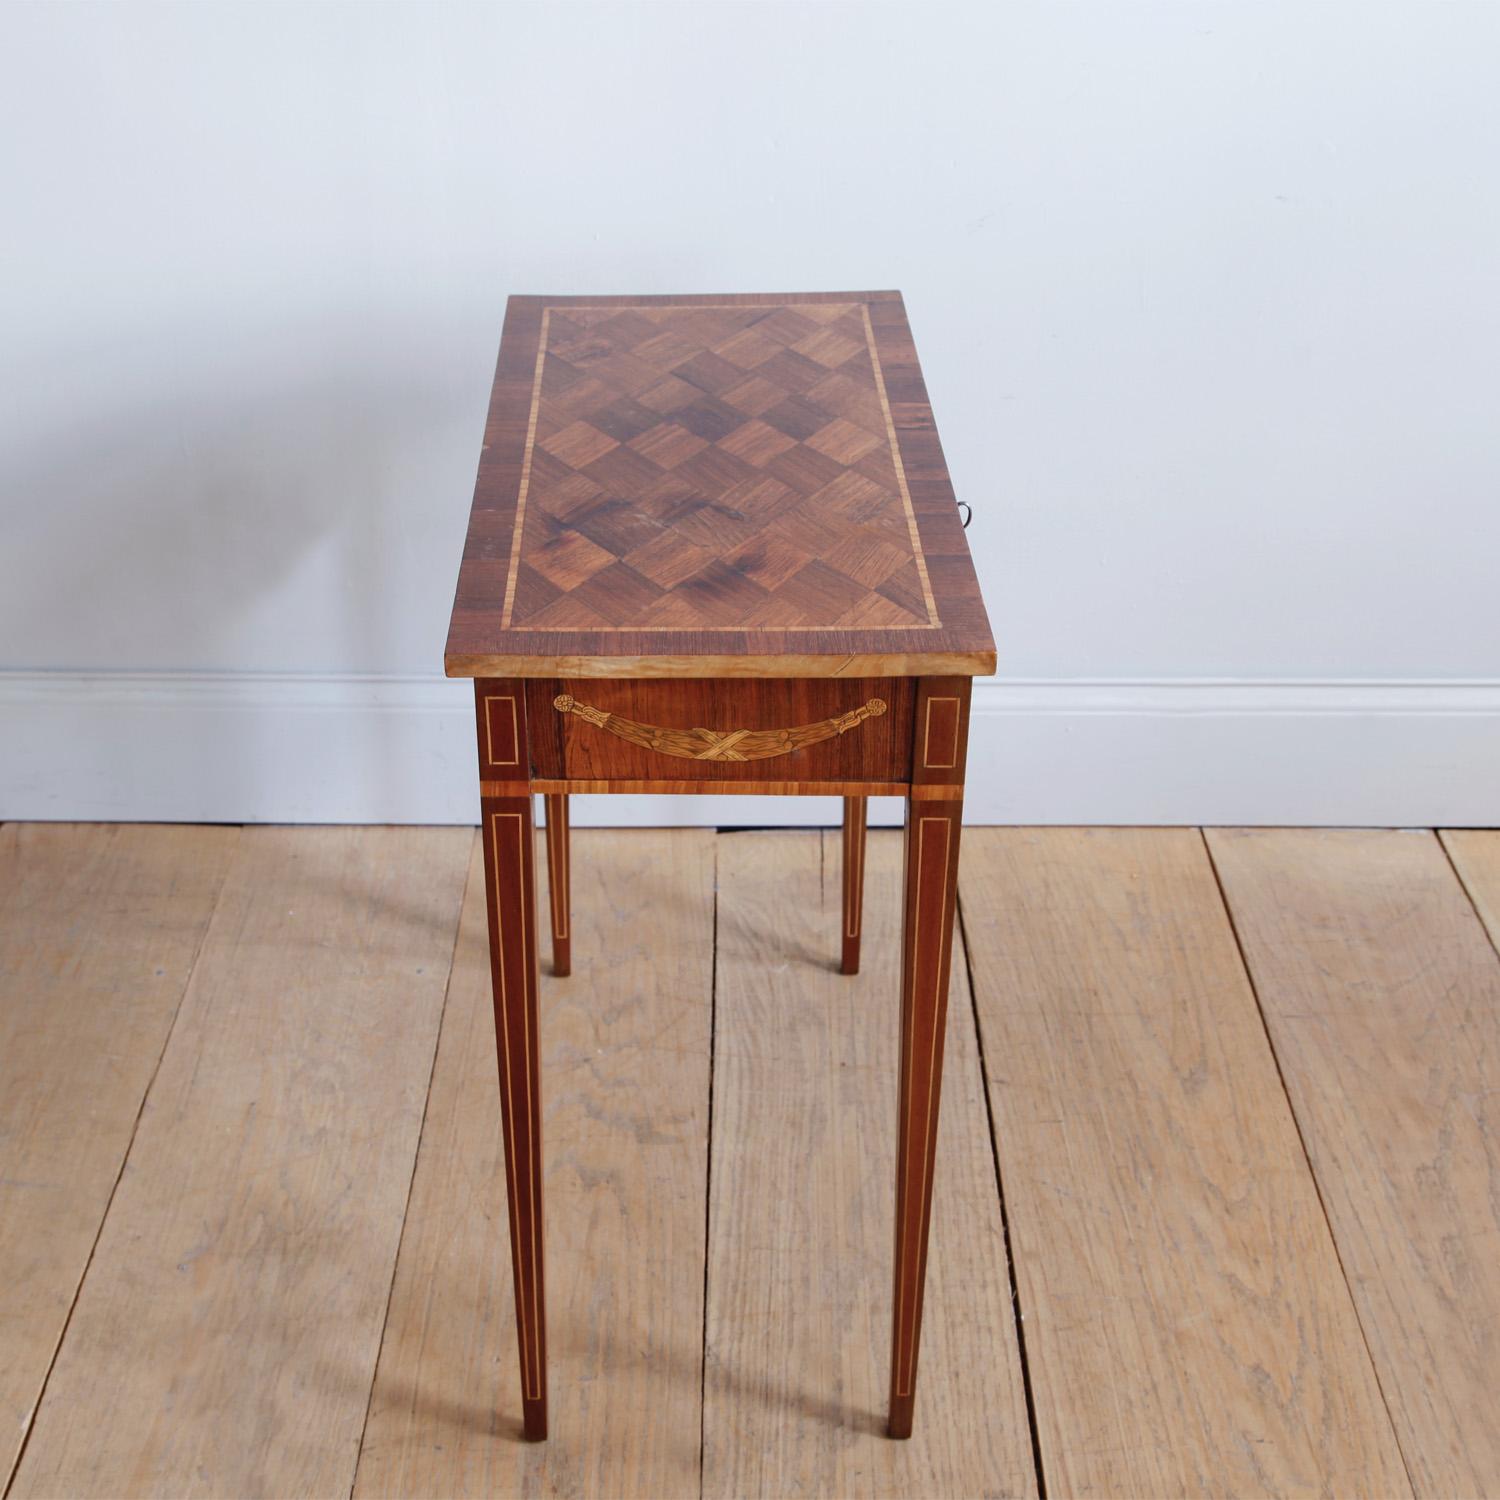 Late 18th Century Swedish Gustavian Occasional Table with Fruitwood Inlay For Sale 5